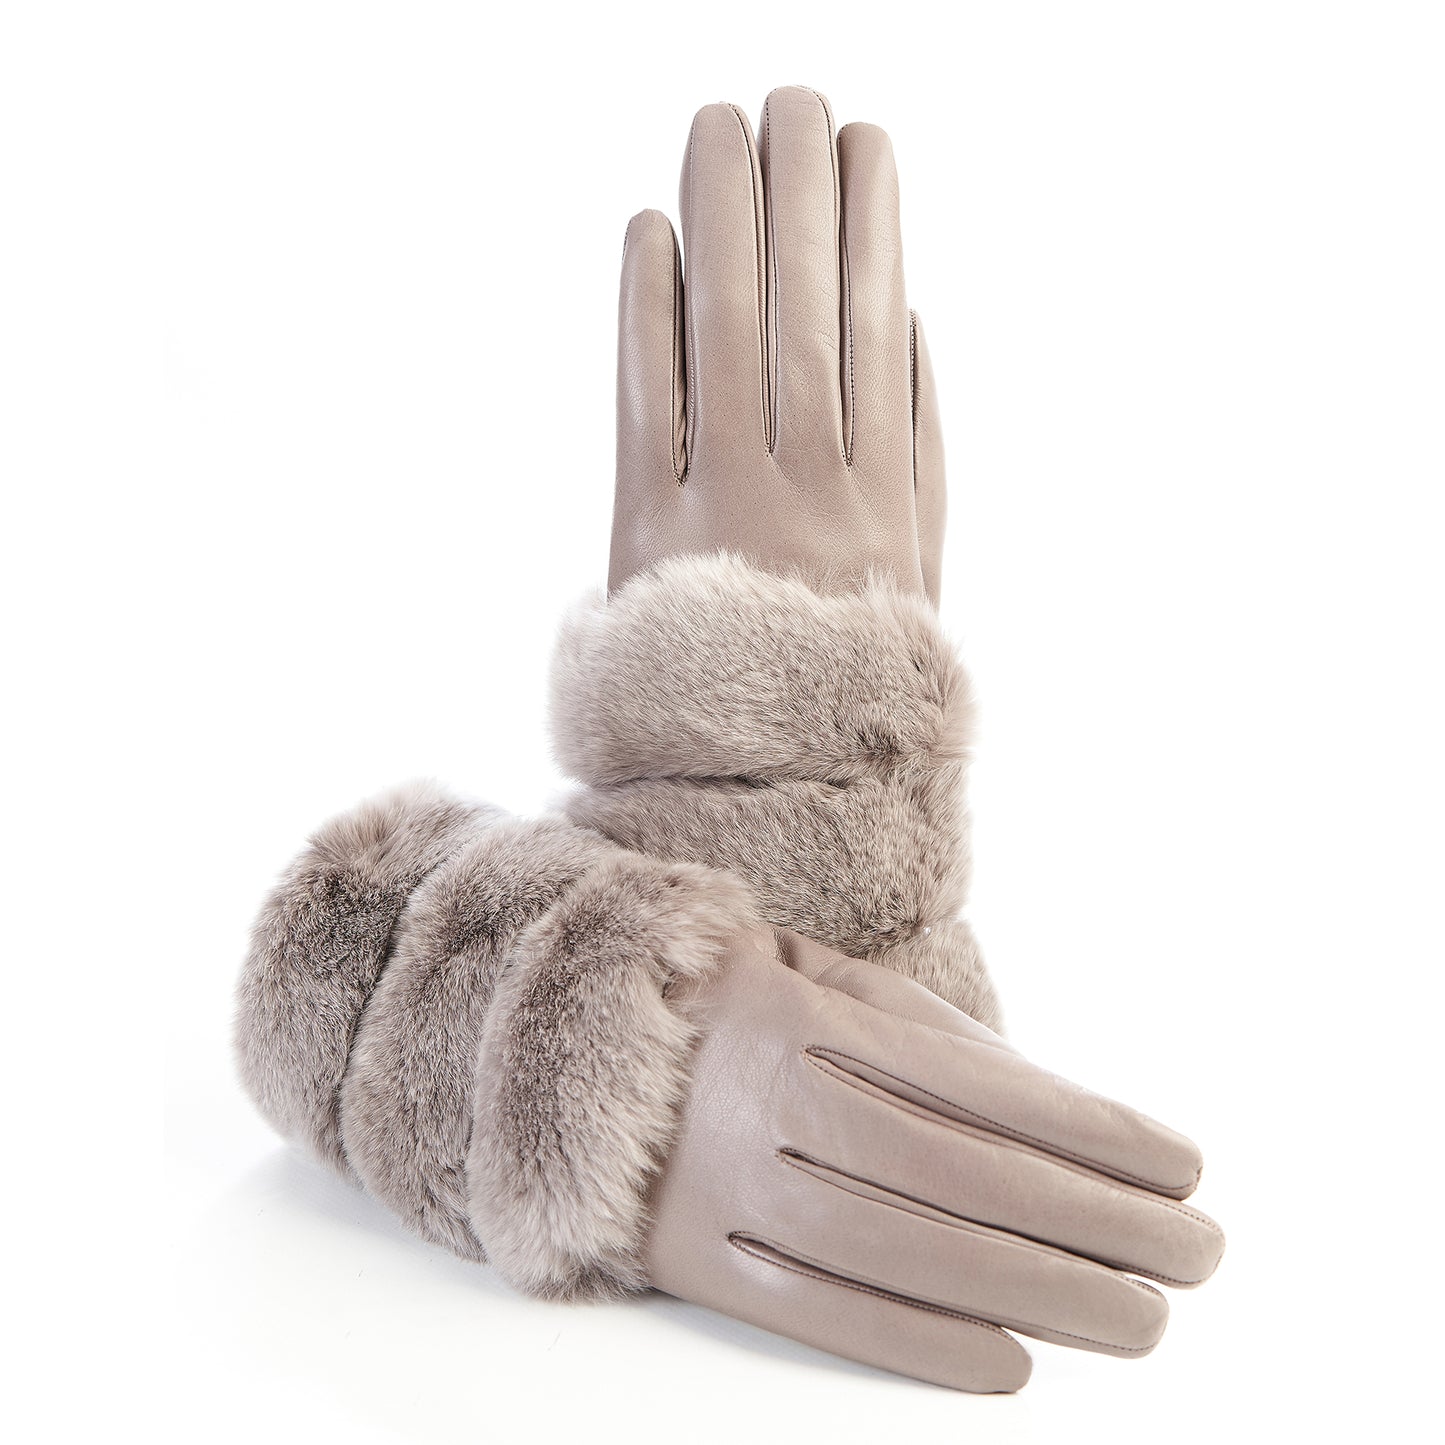 Women's gloves in tortora nappa leather with natural fur